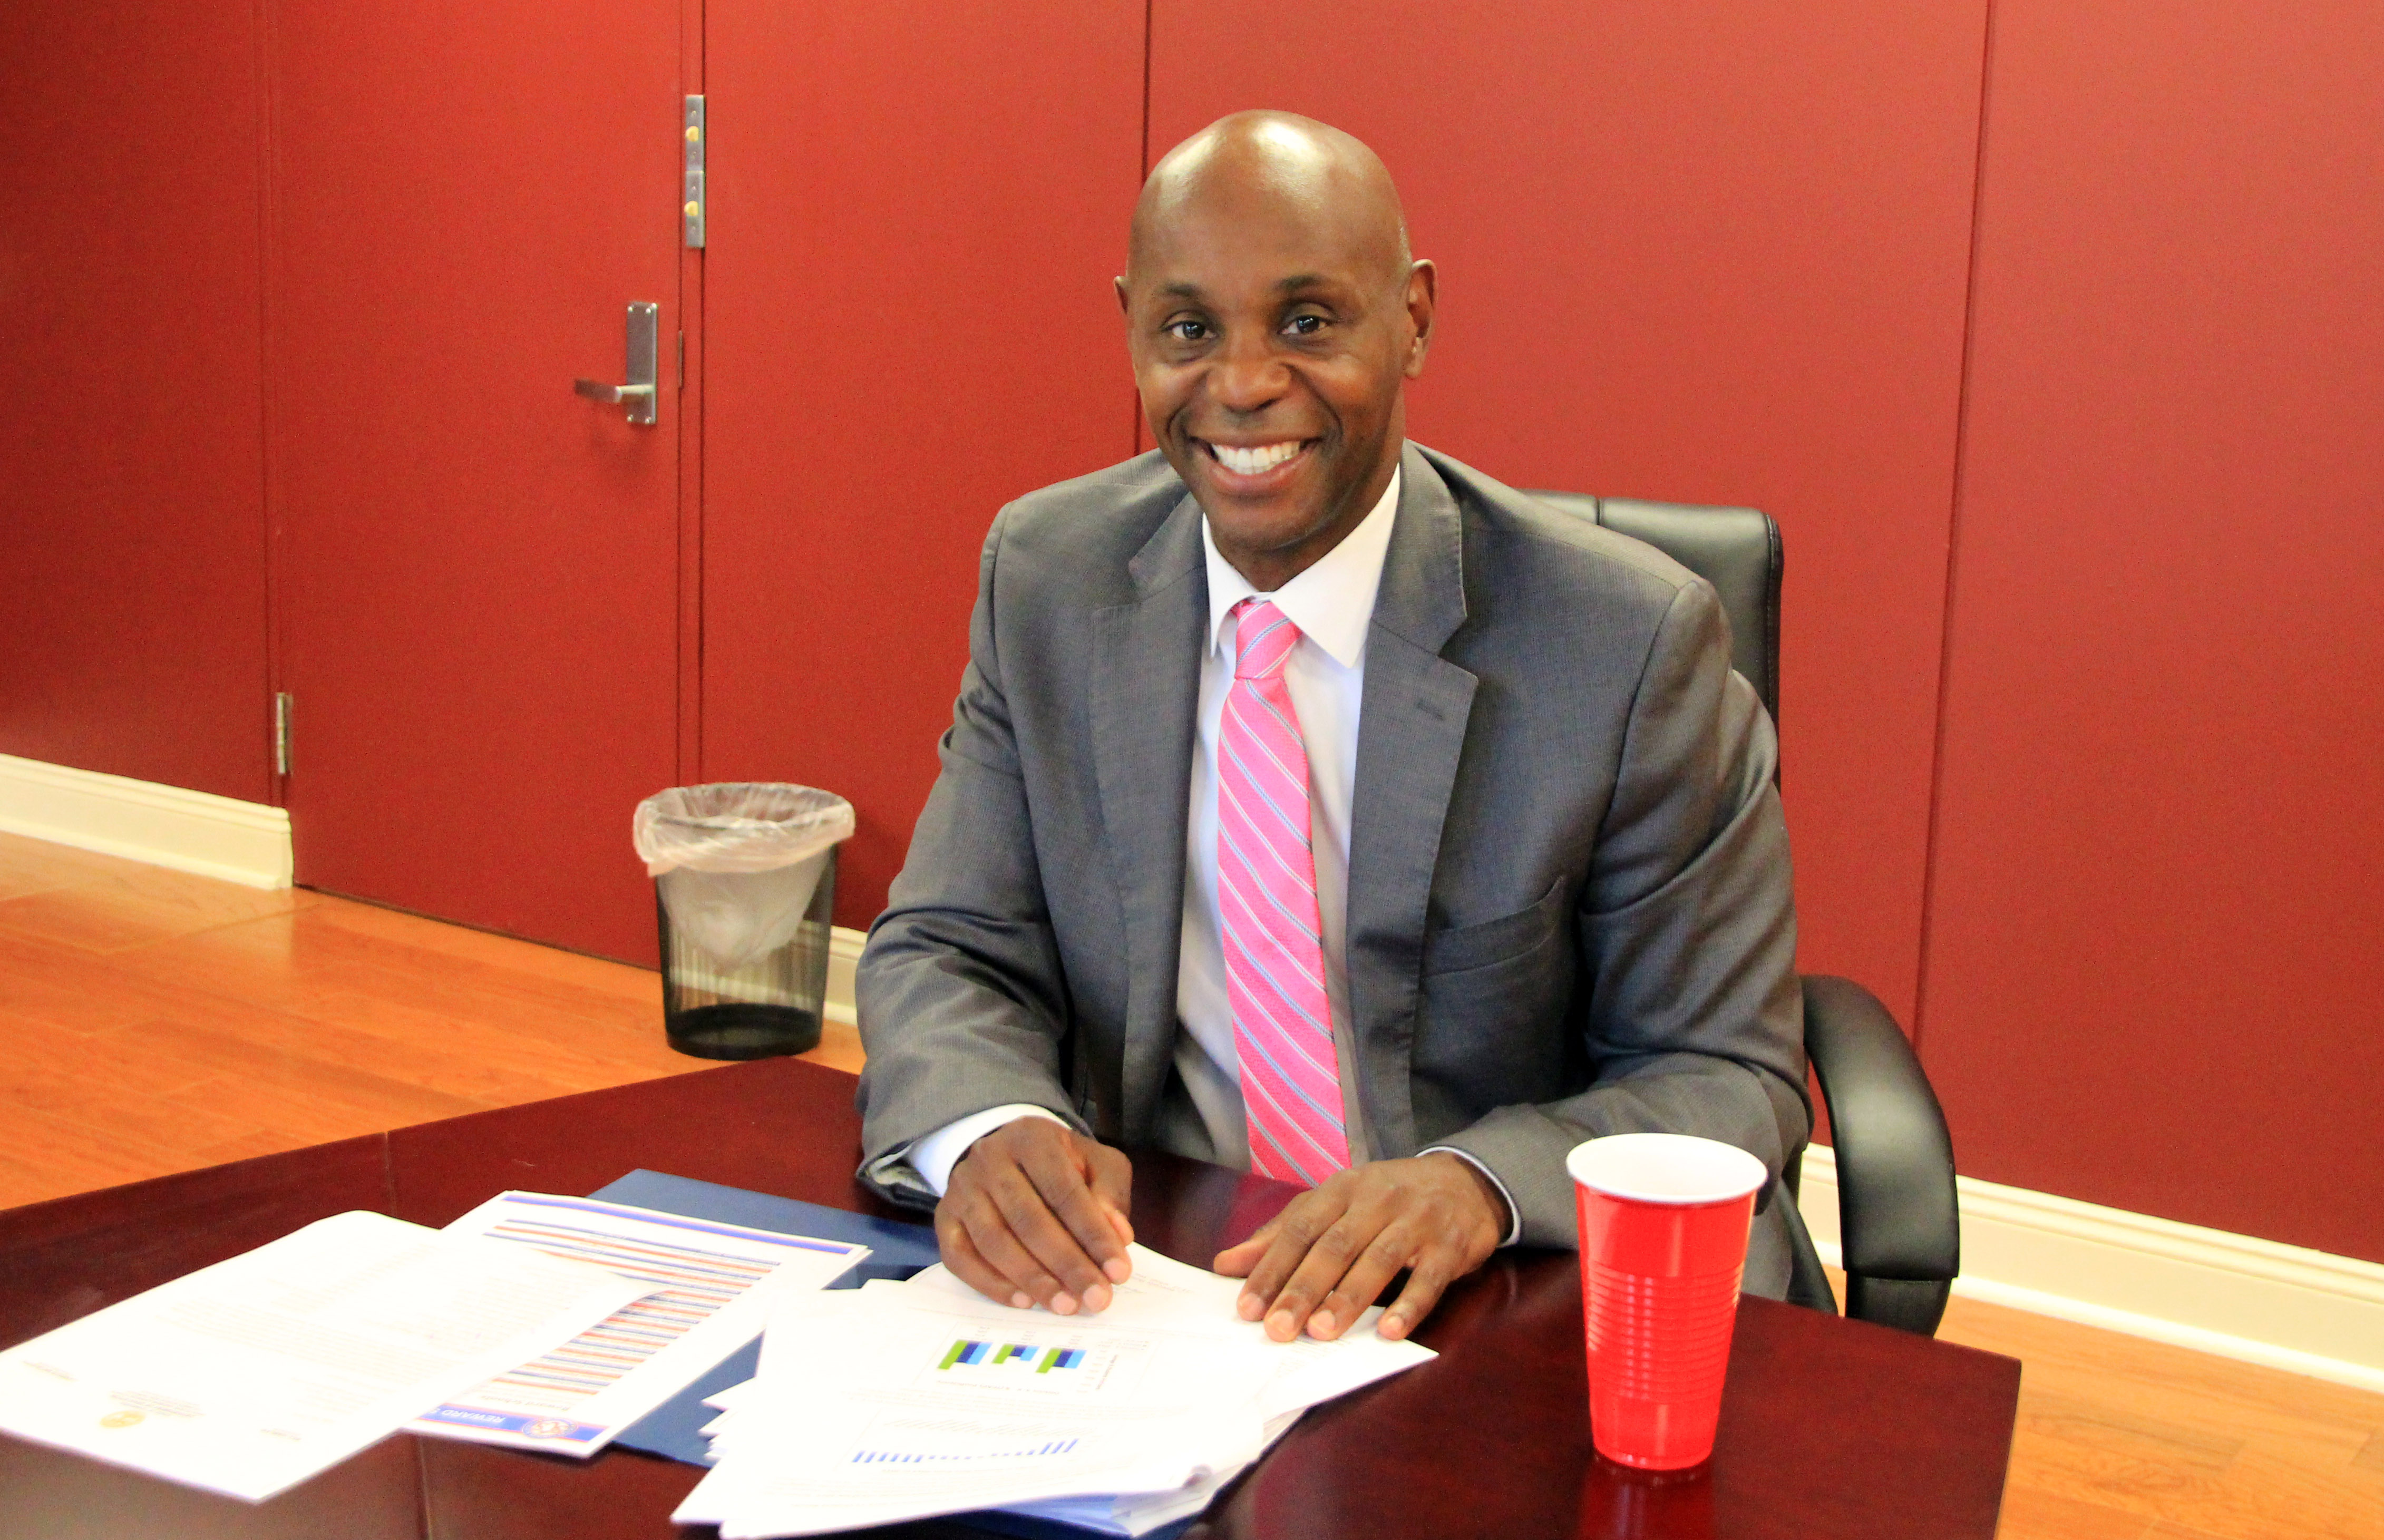 Superintendent Dorsey Hopson has overseen Tennessee's largest public school district since 2013.